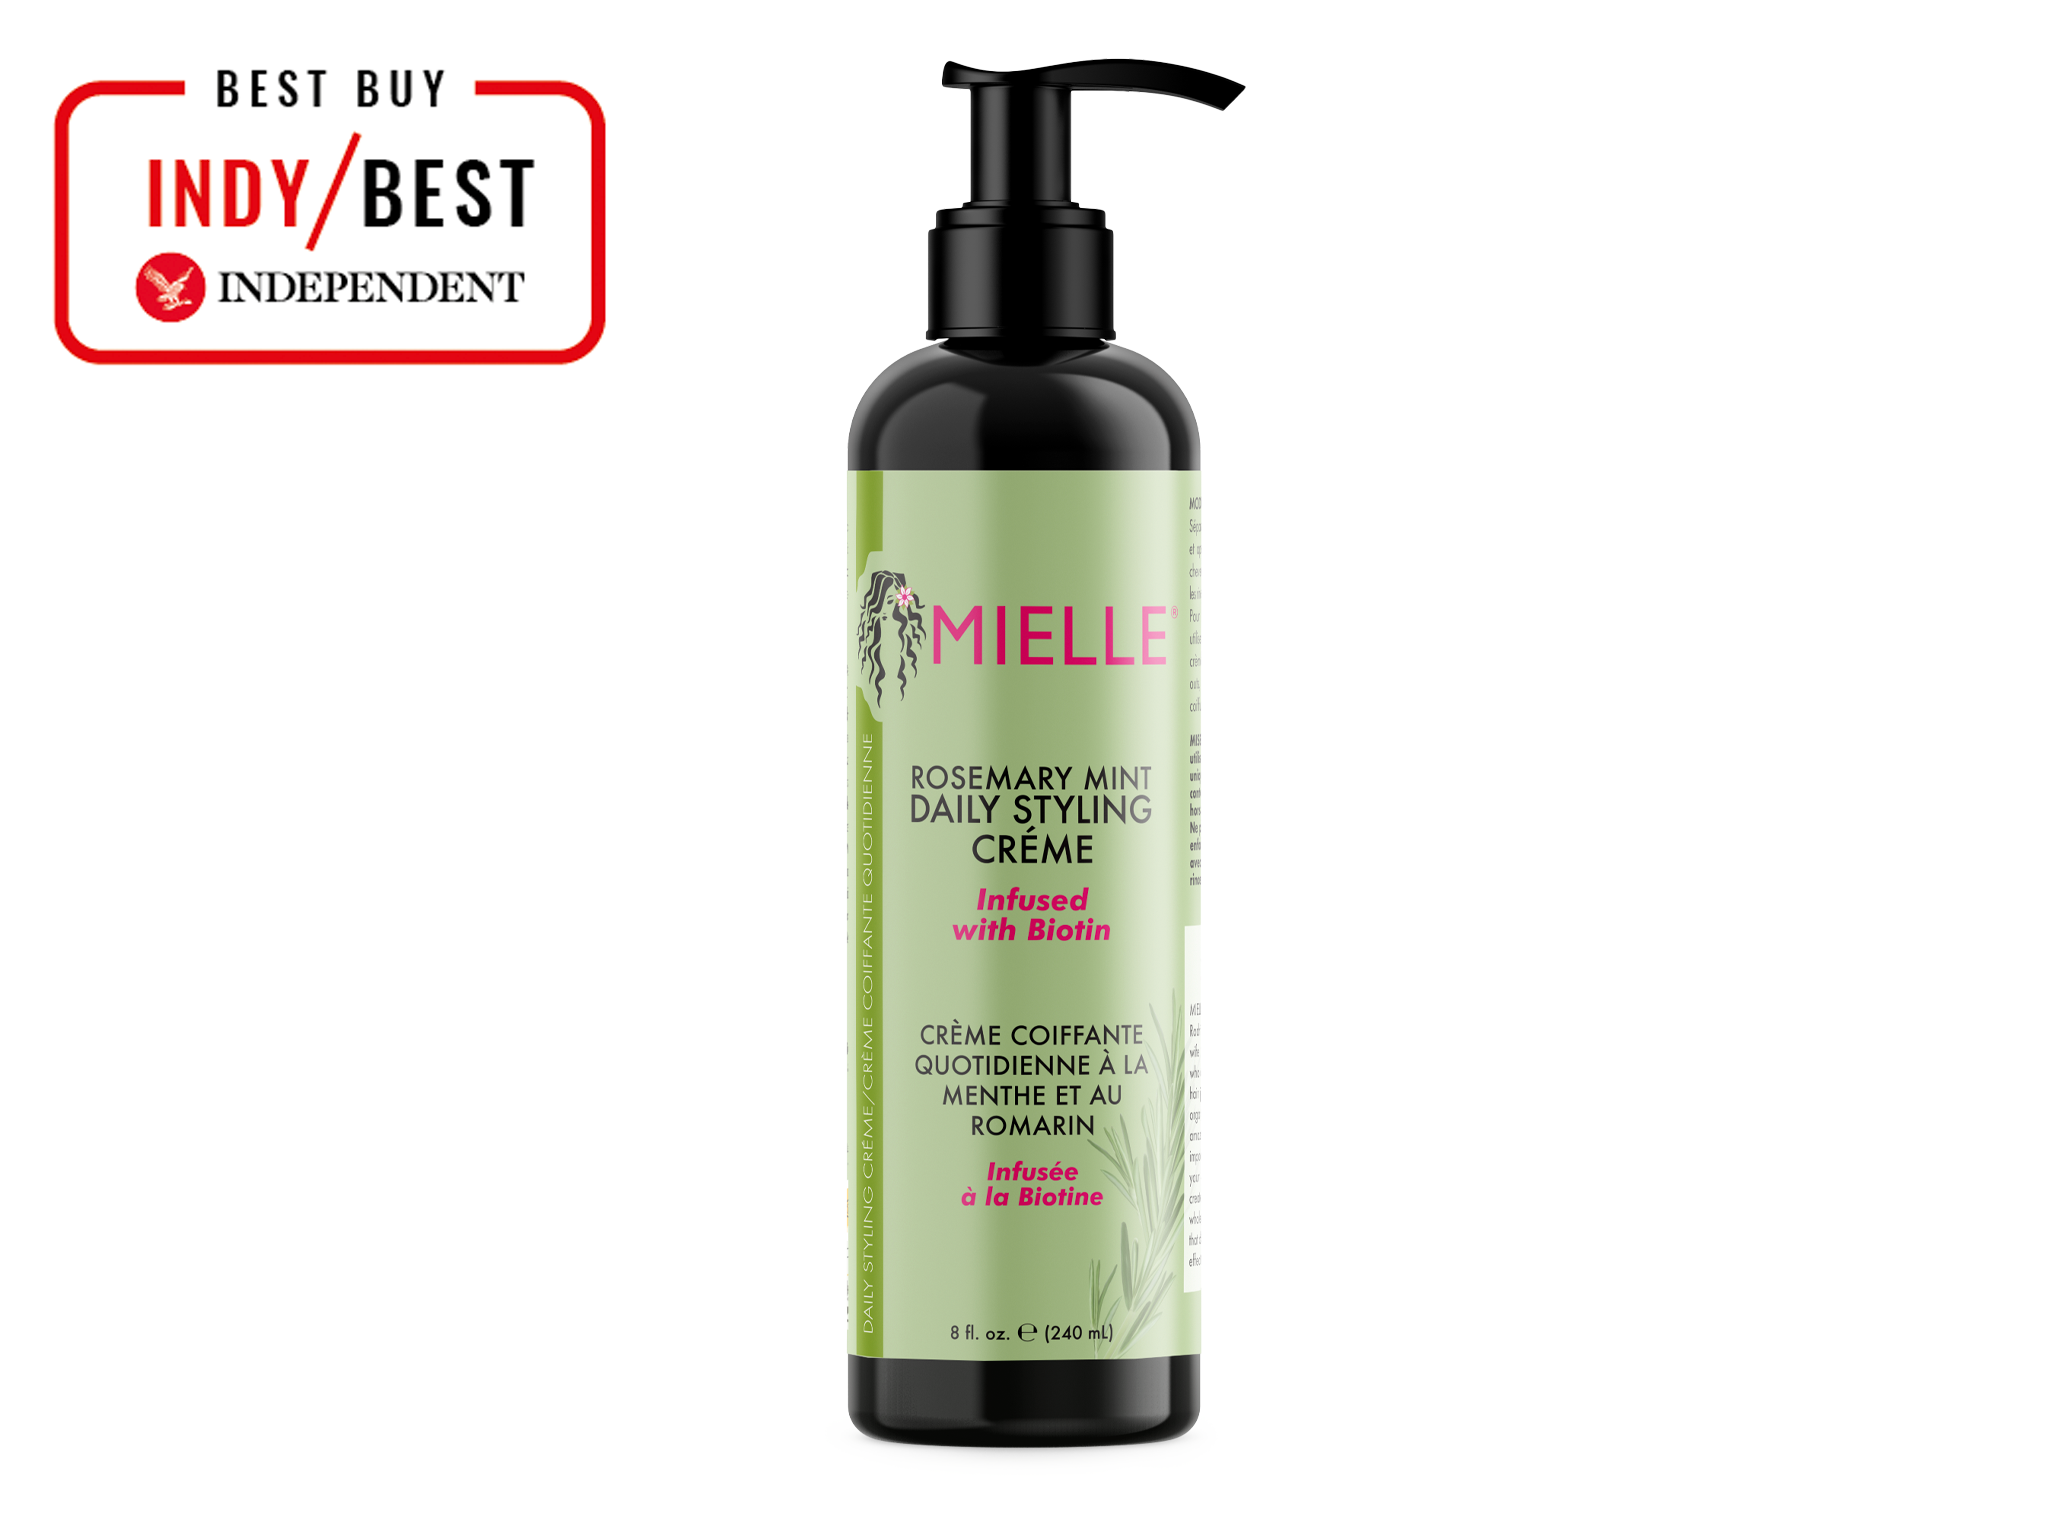 Mielle-best-anti-frizz-products-indybest